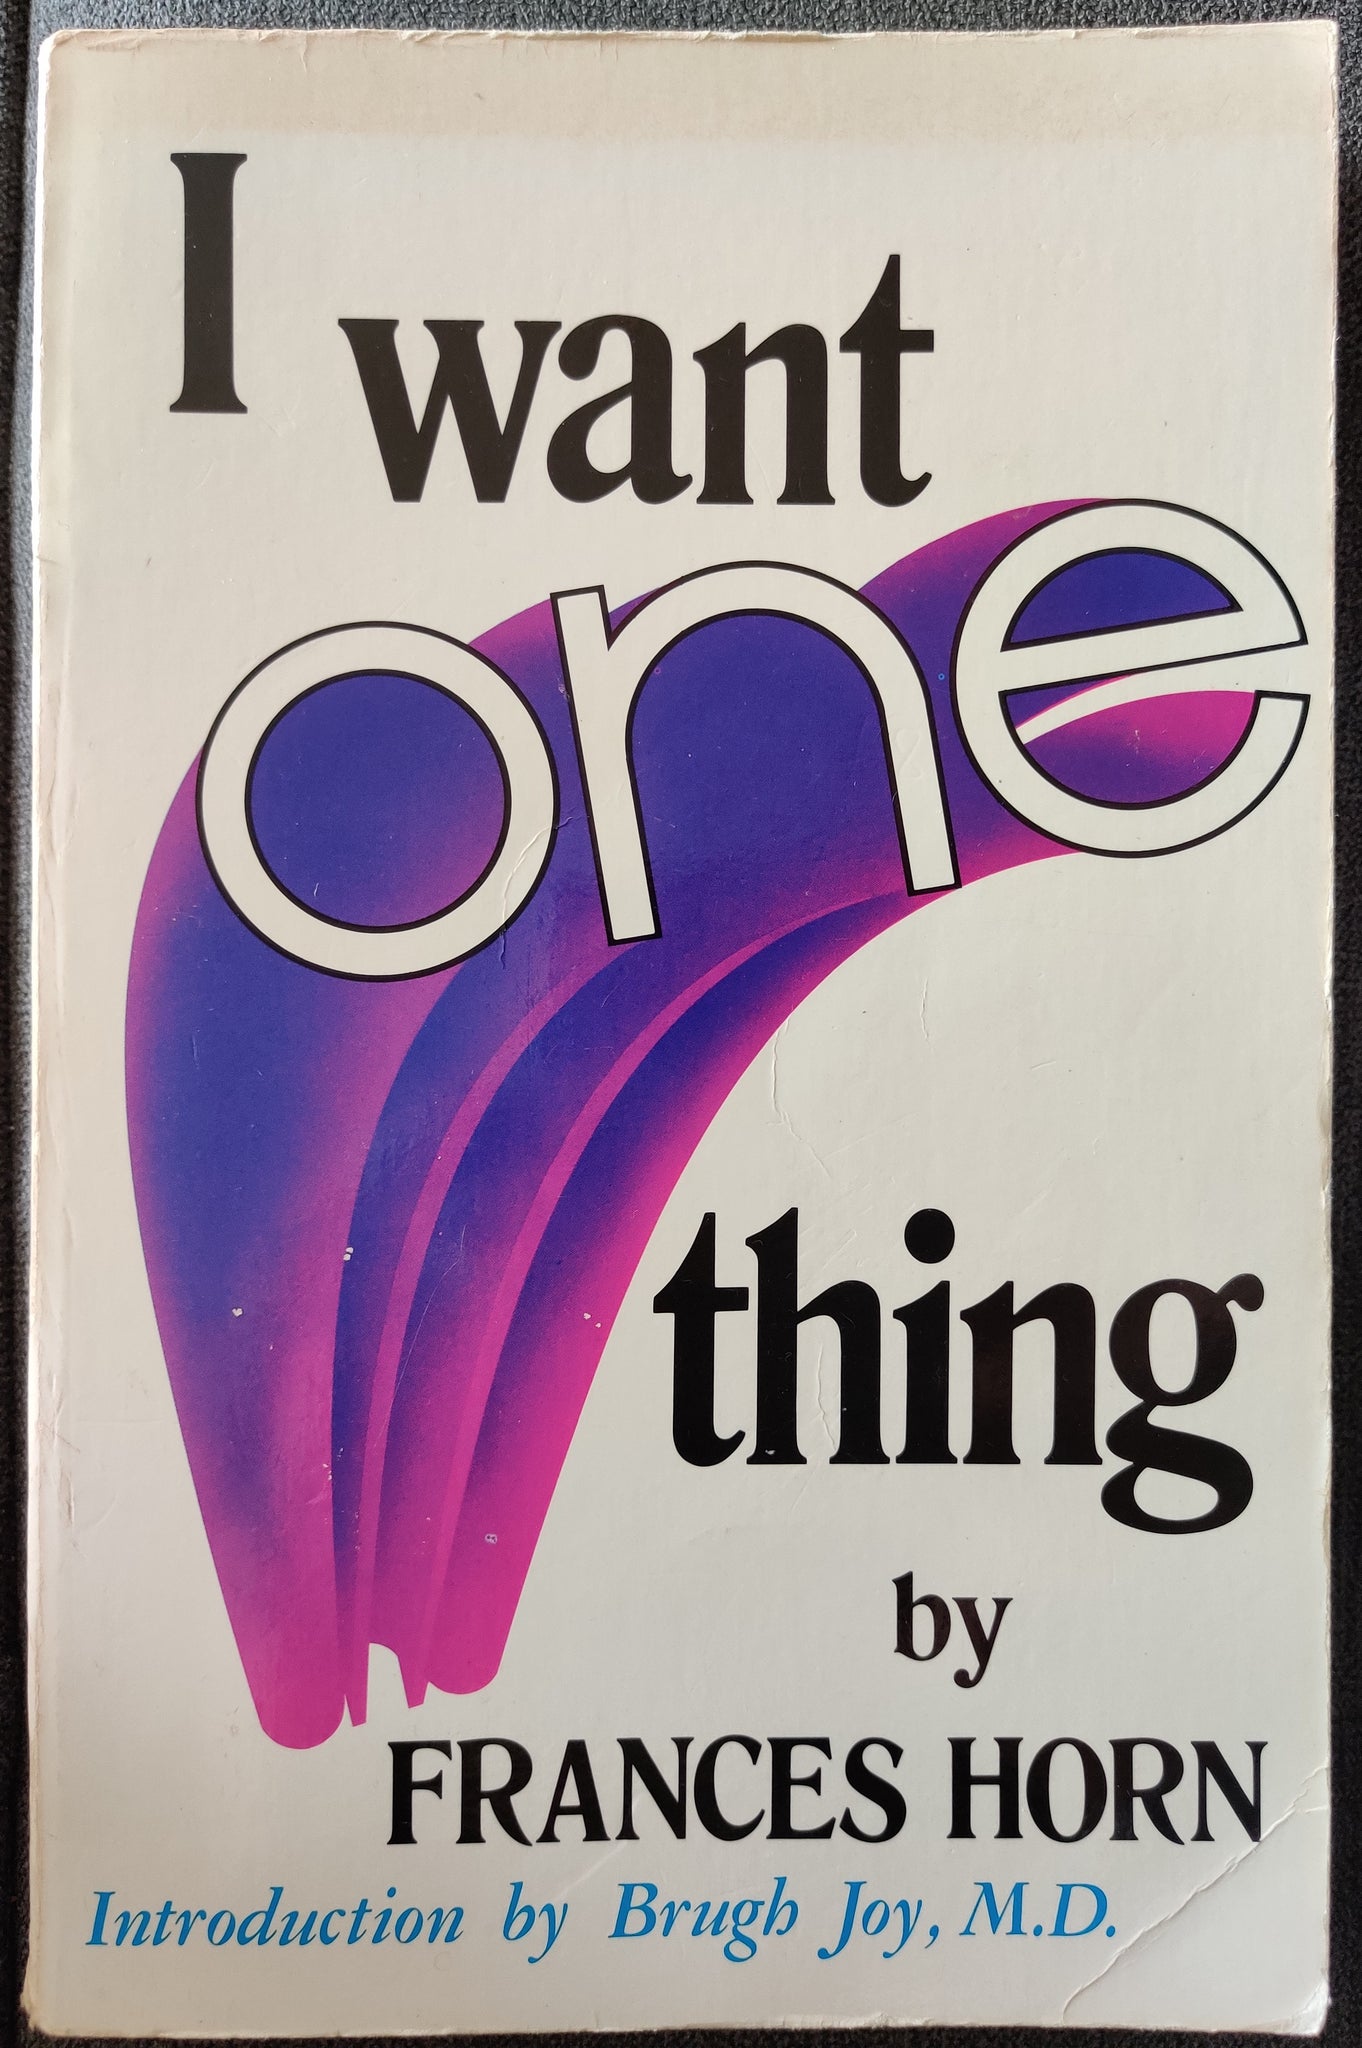 I Want One Thing by Frances Horn